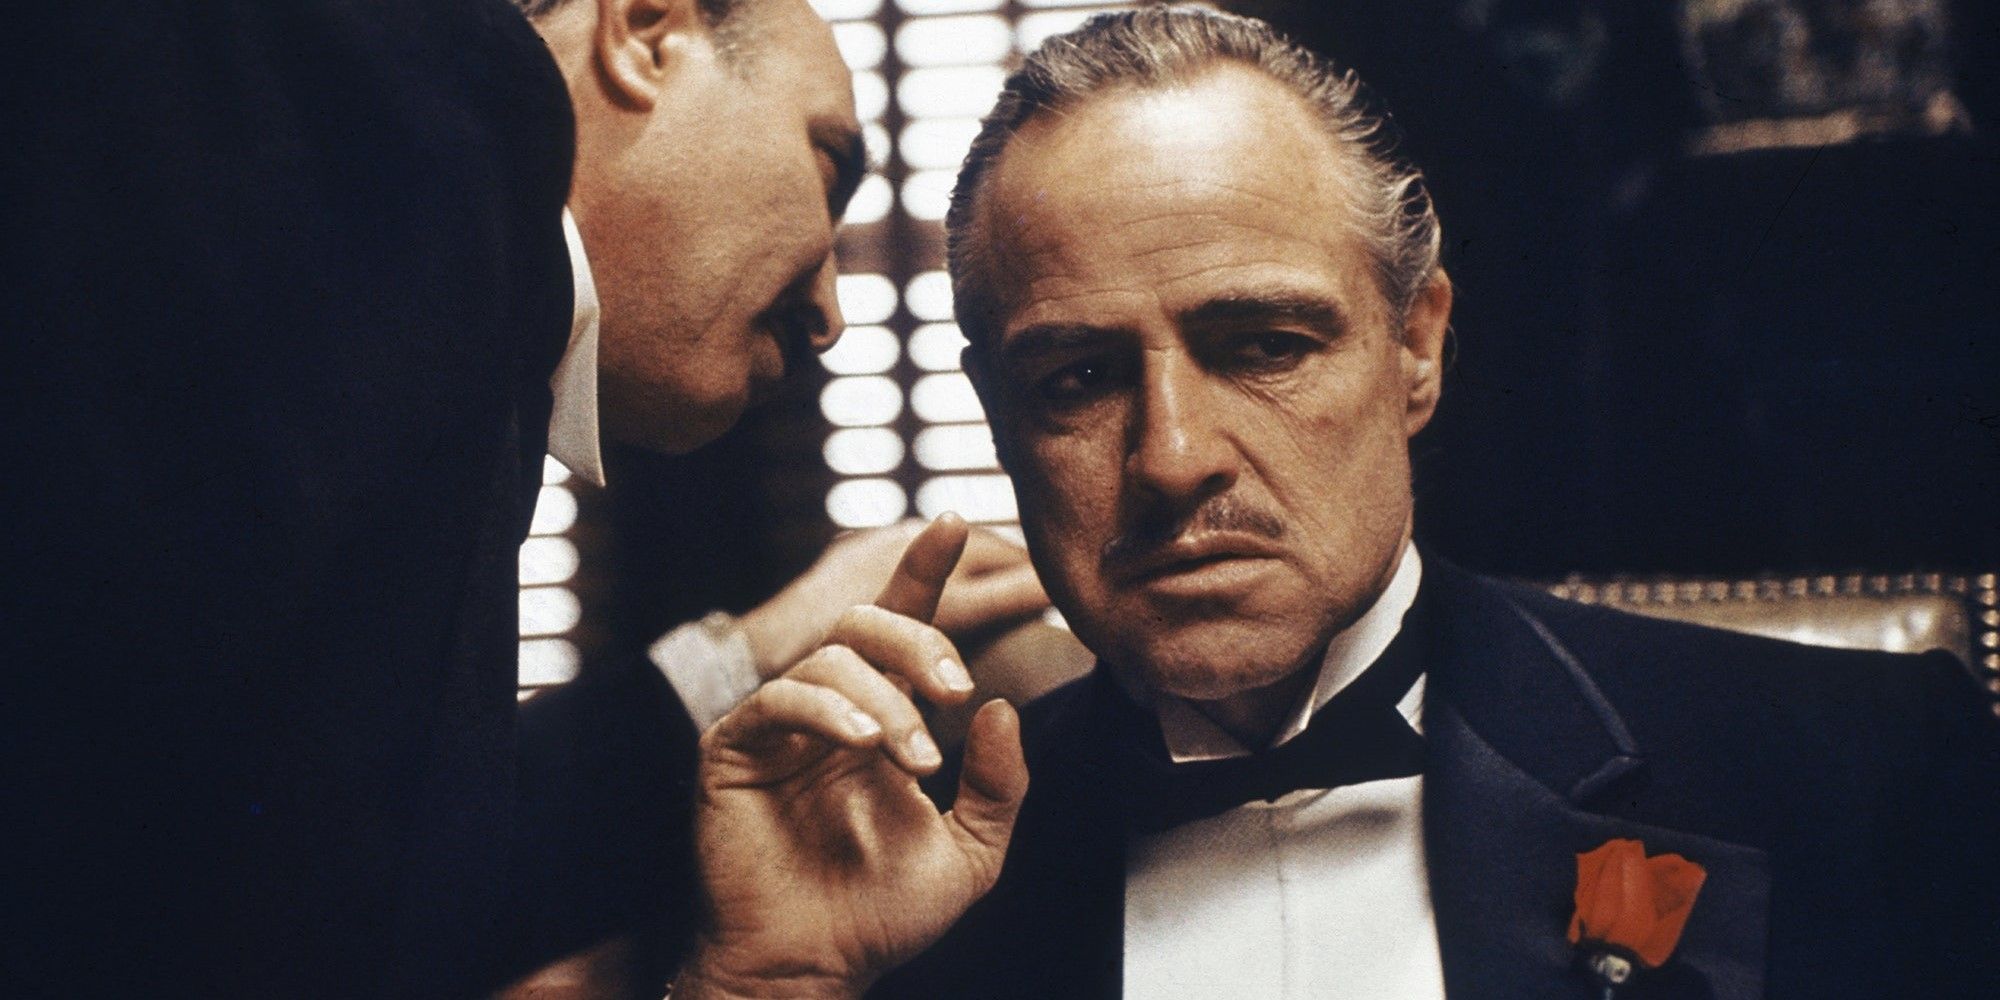 A man whispering in Don Vito Corleone's ear in The Godfather.